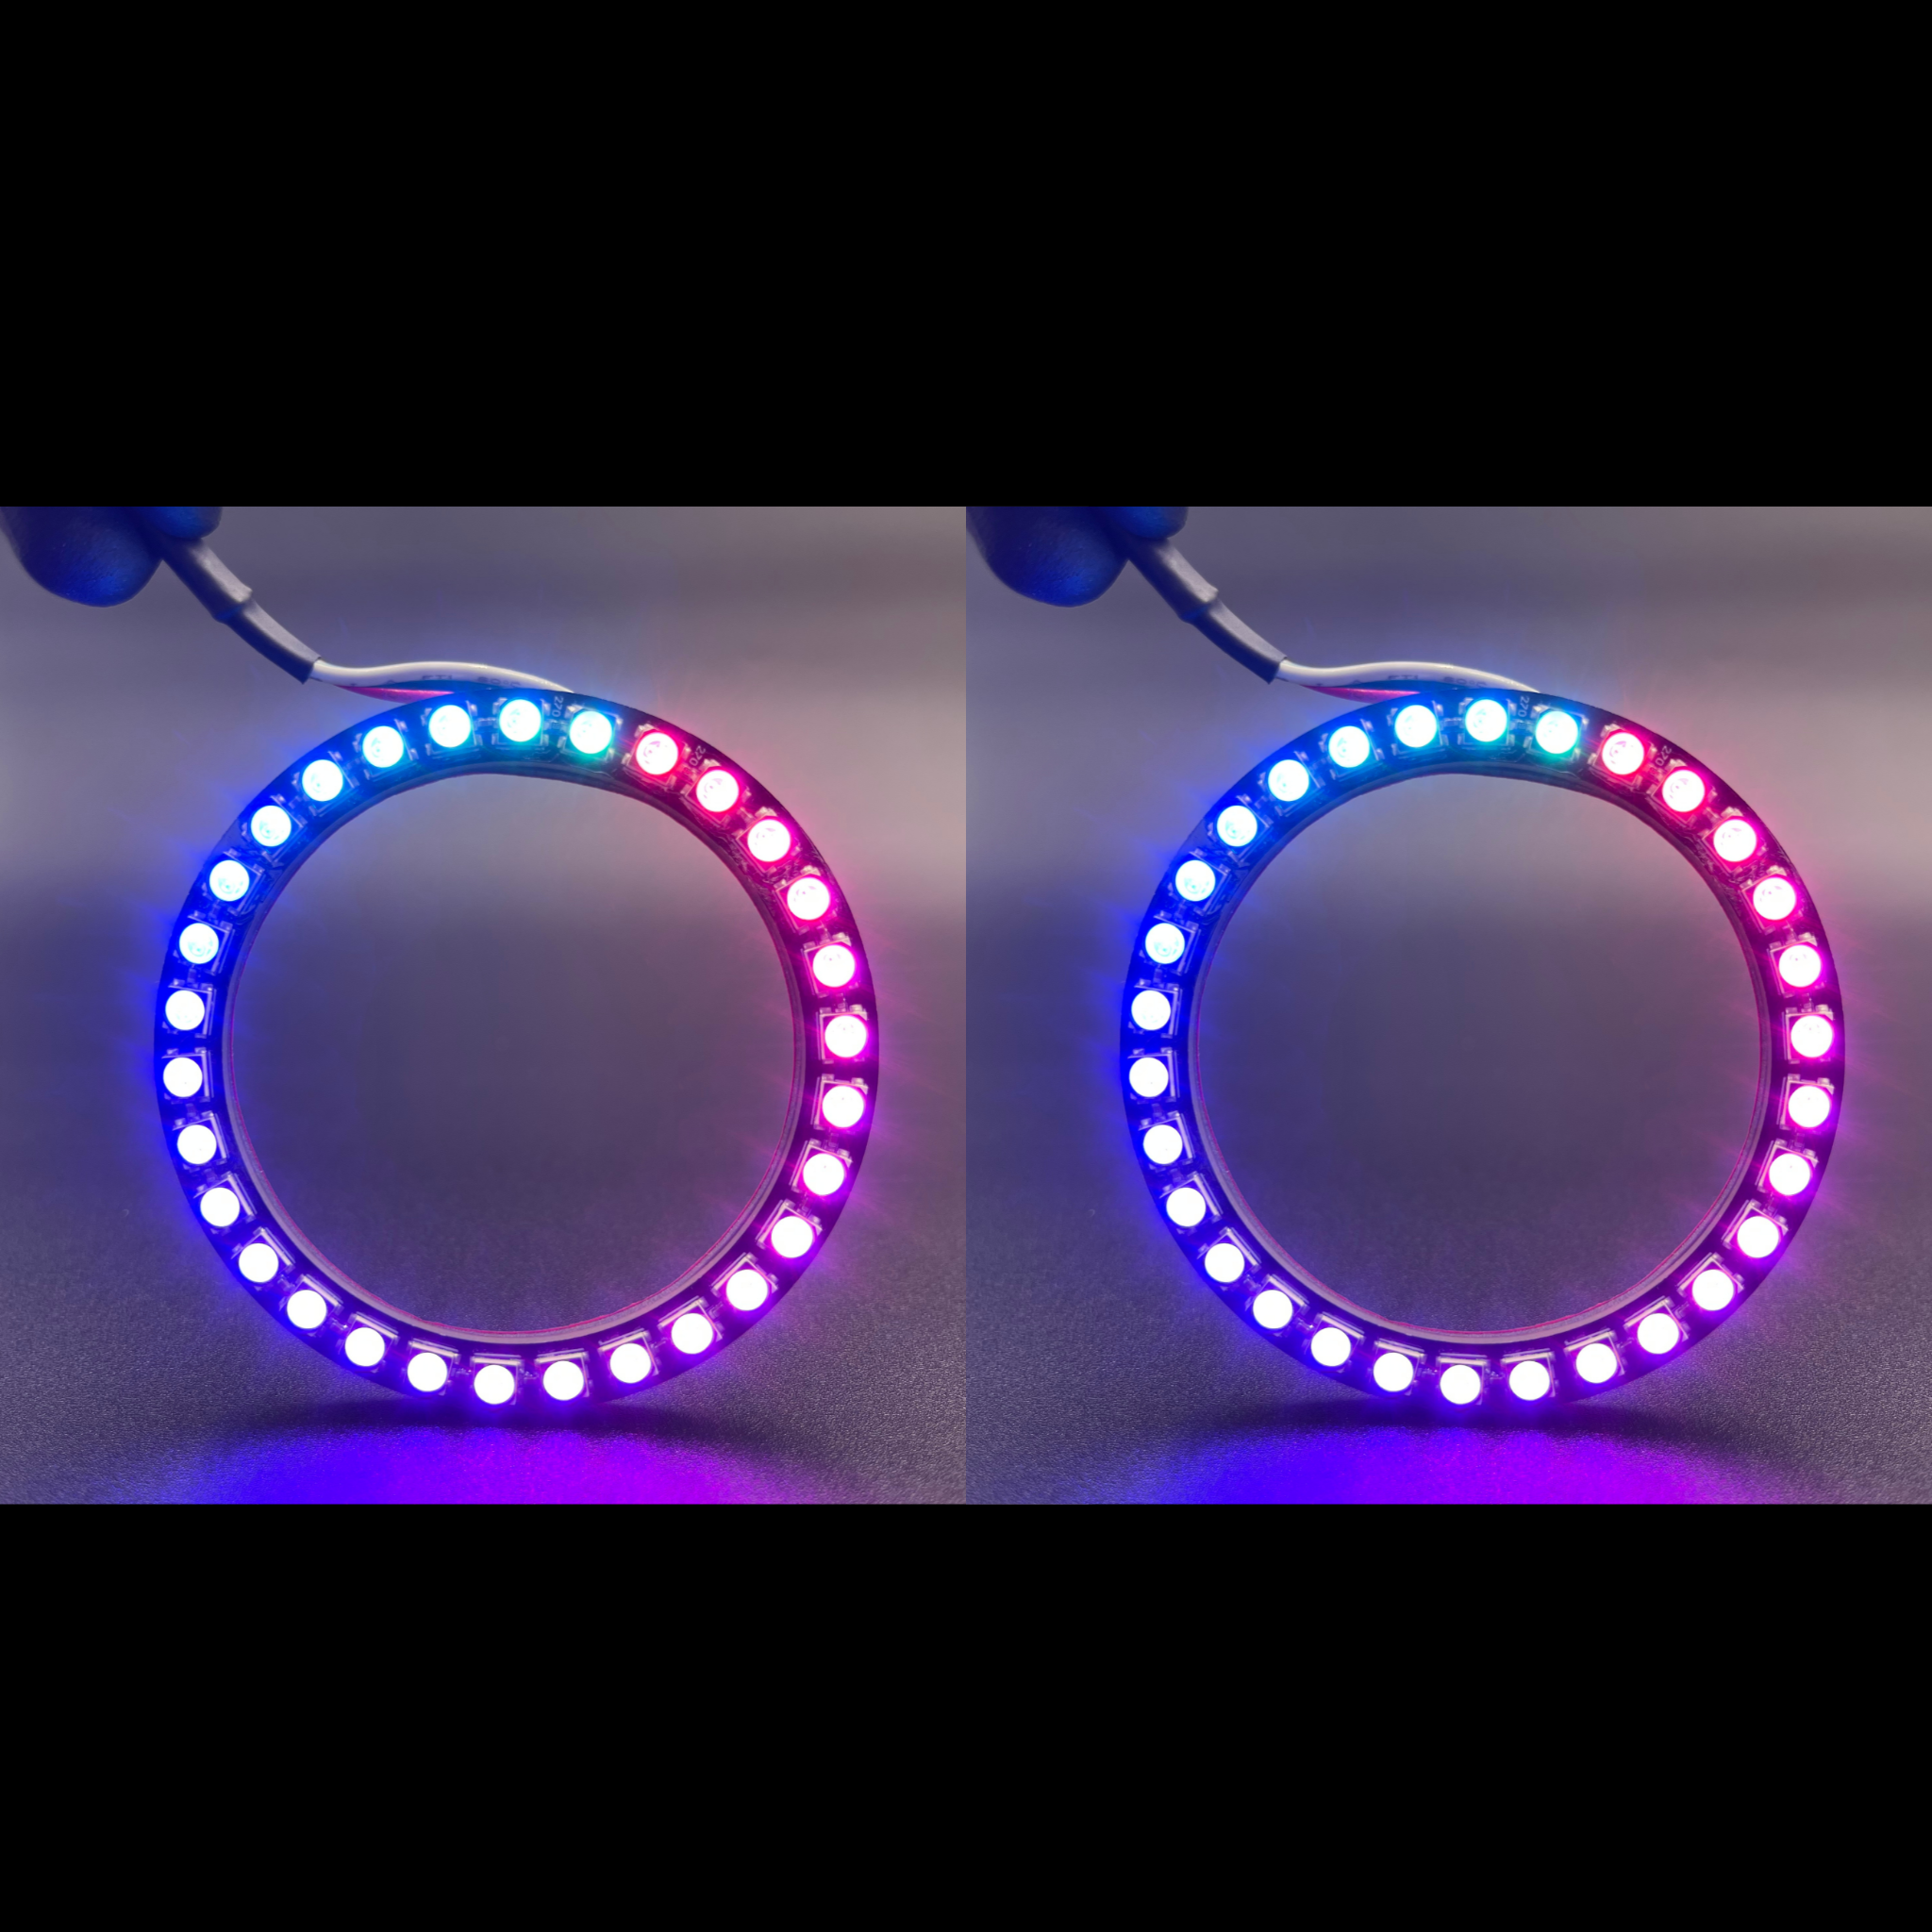 1997-2003 Ford F150 Multicolor Halo Kit - RGB Halo Kits Multicolor Flow Series Color Chasing RGBWA LED headlight kit Colorshift Oracle Lighting Trendz OneUpLighting Morimoto theretrofitsource AutoLEDTech Diode Dynamics